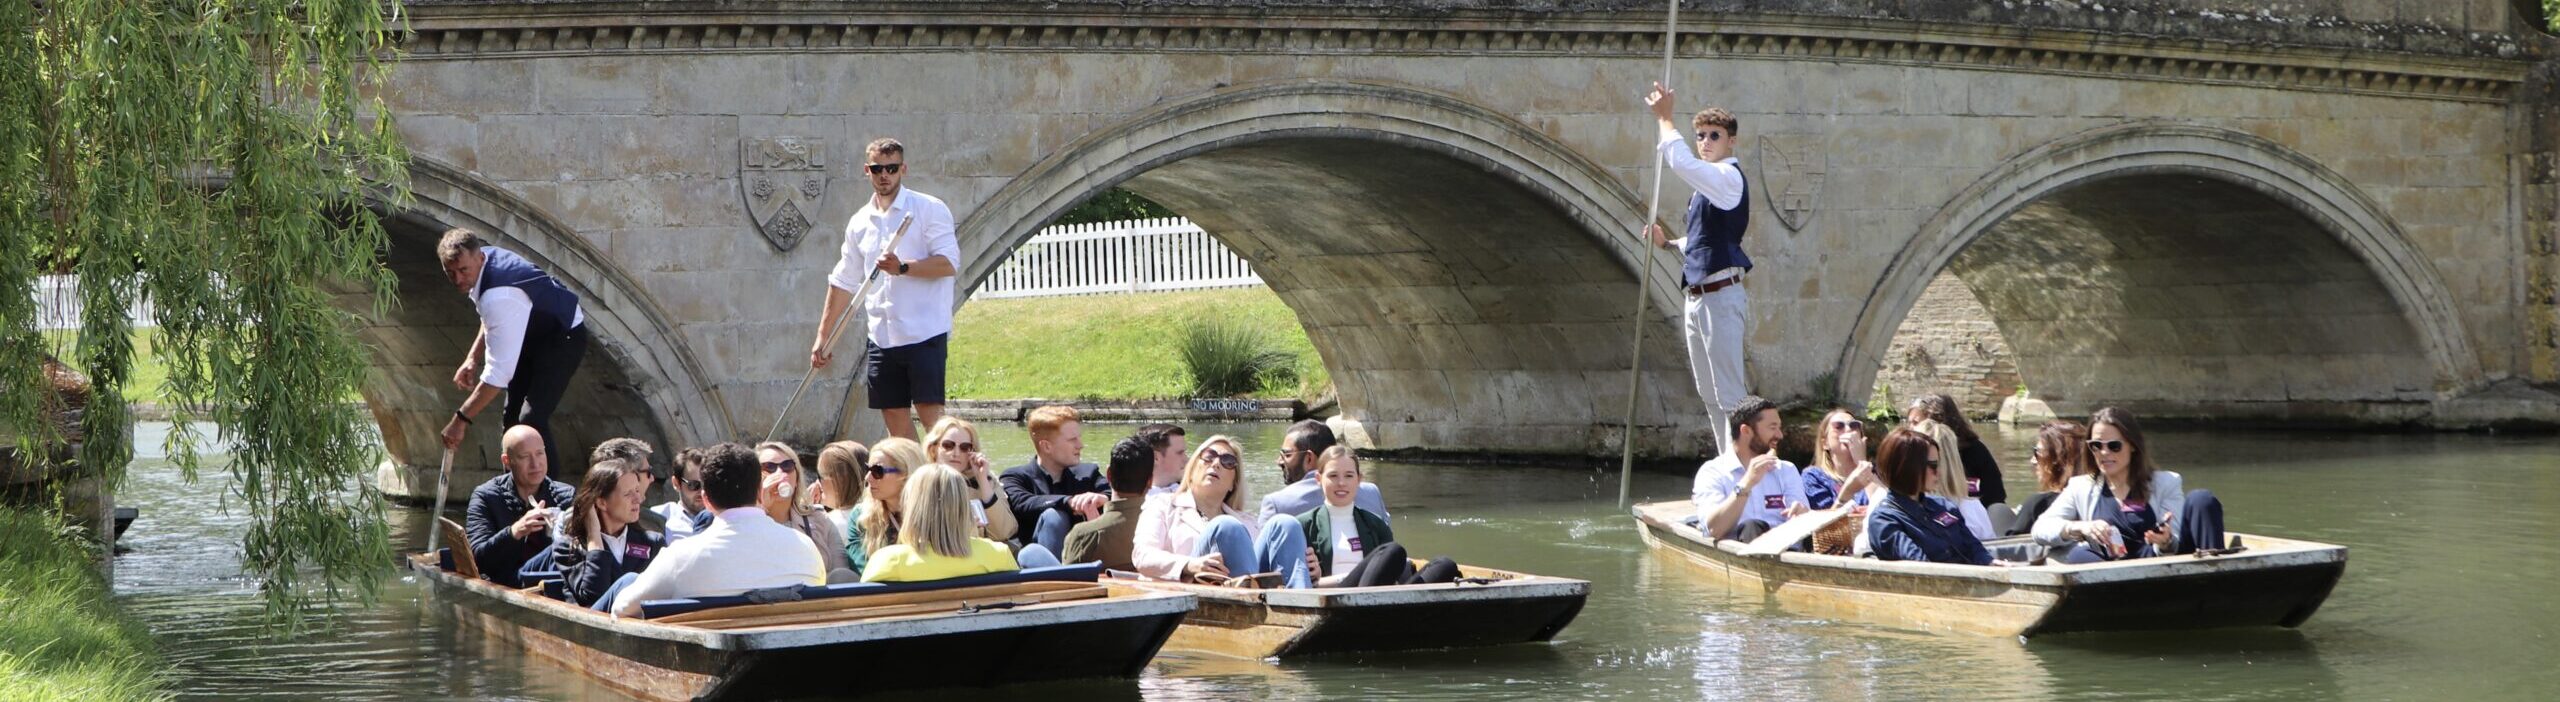 Private Punting